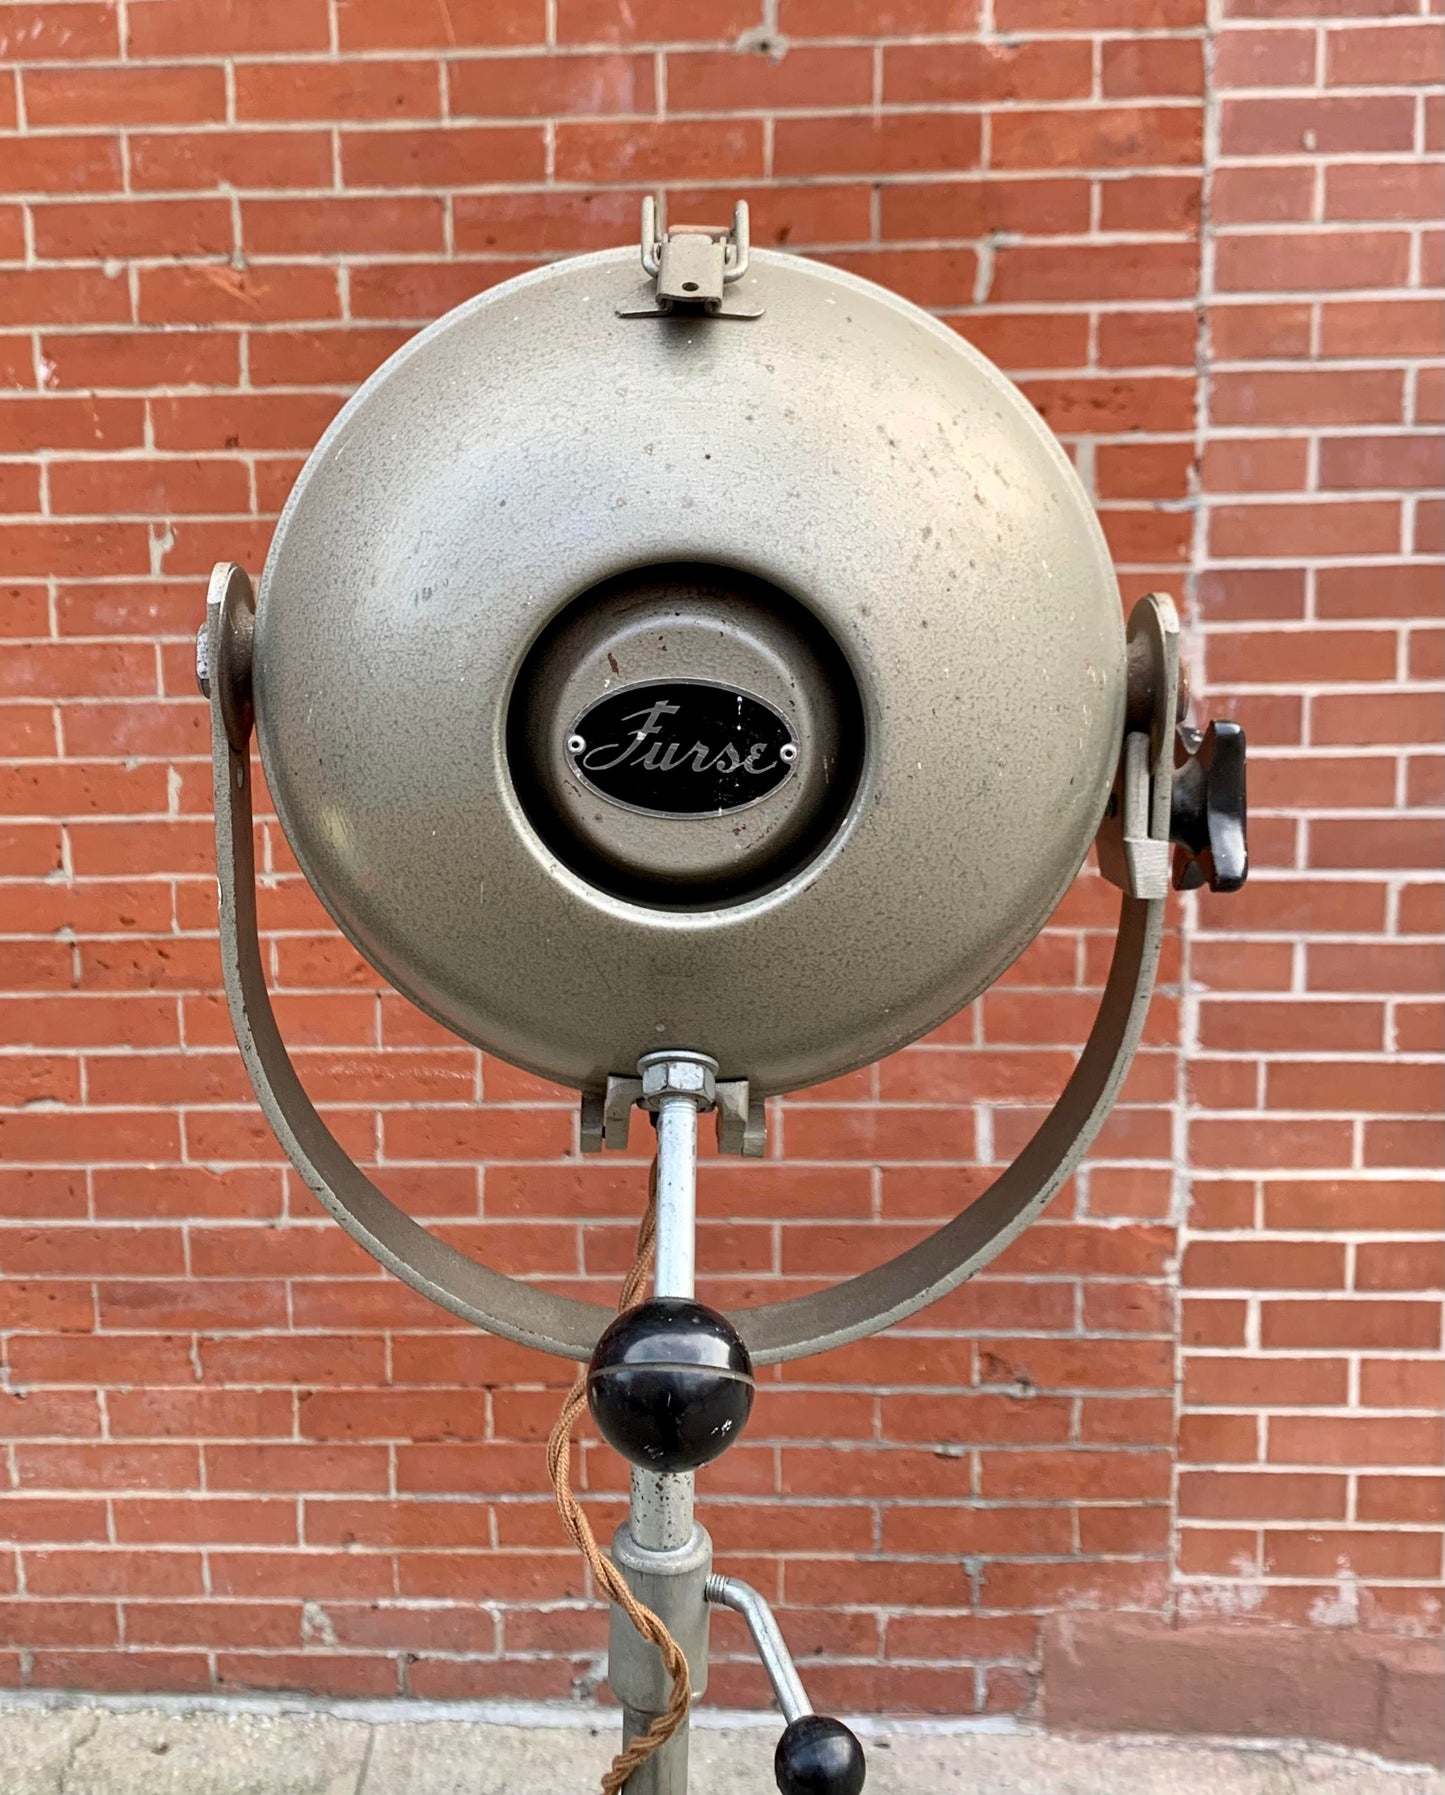 Theater Spotlight Manufactured by Furse on Vintage Tripod, Uk, 1950's